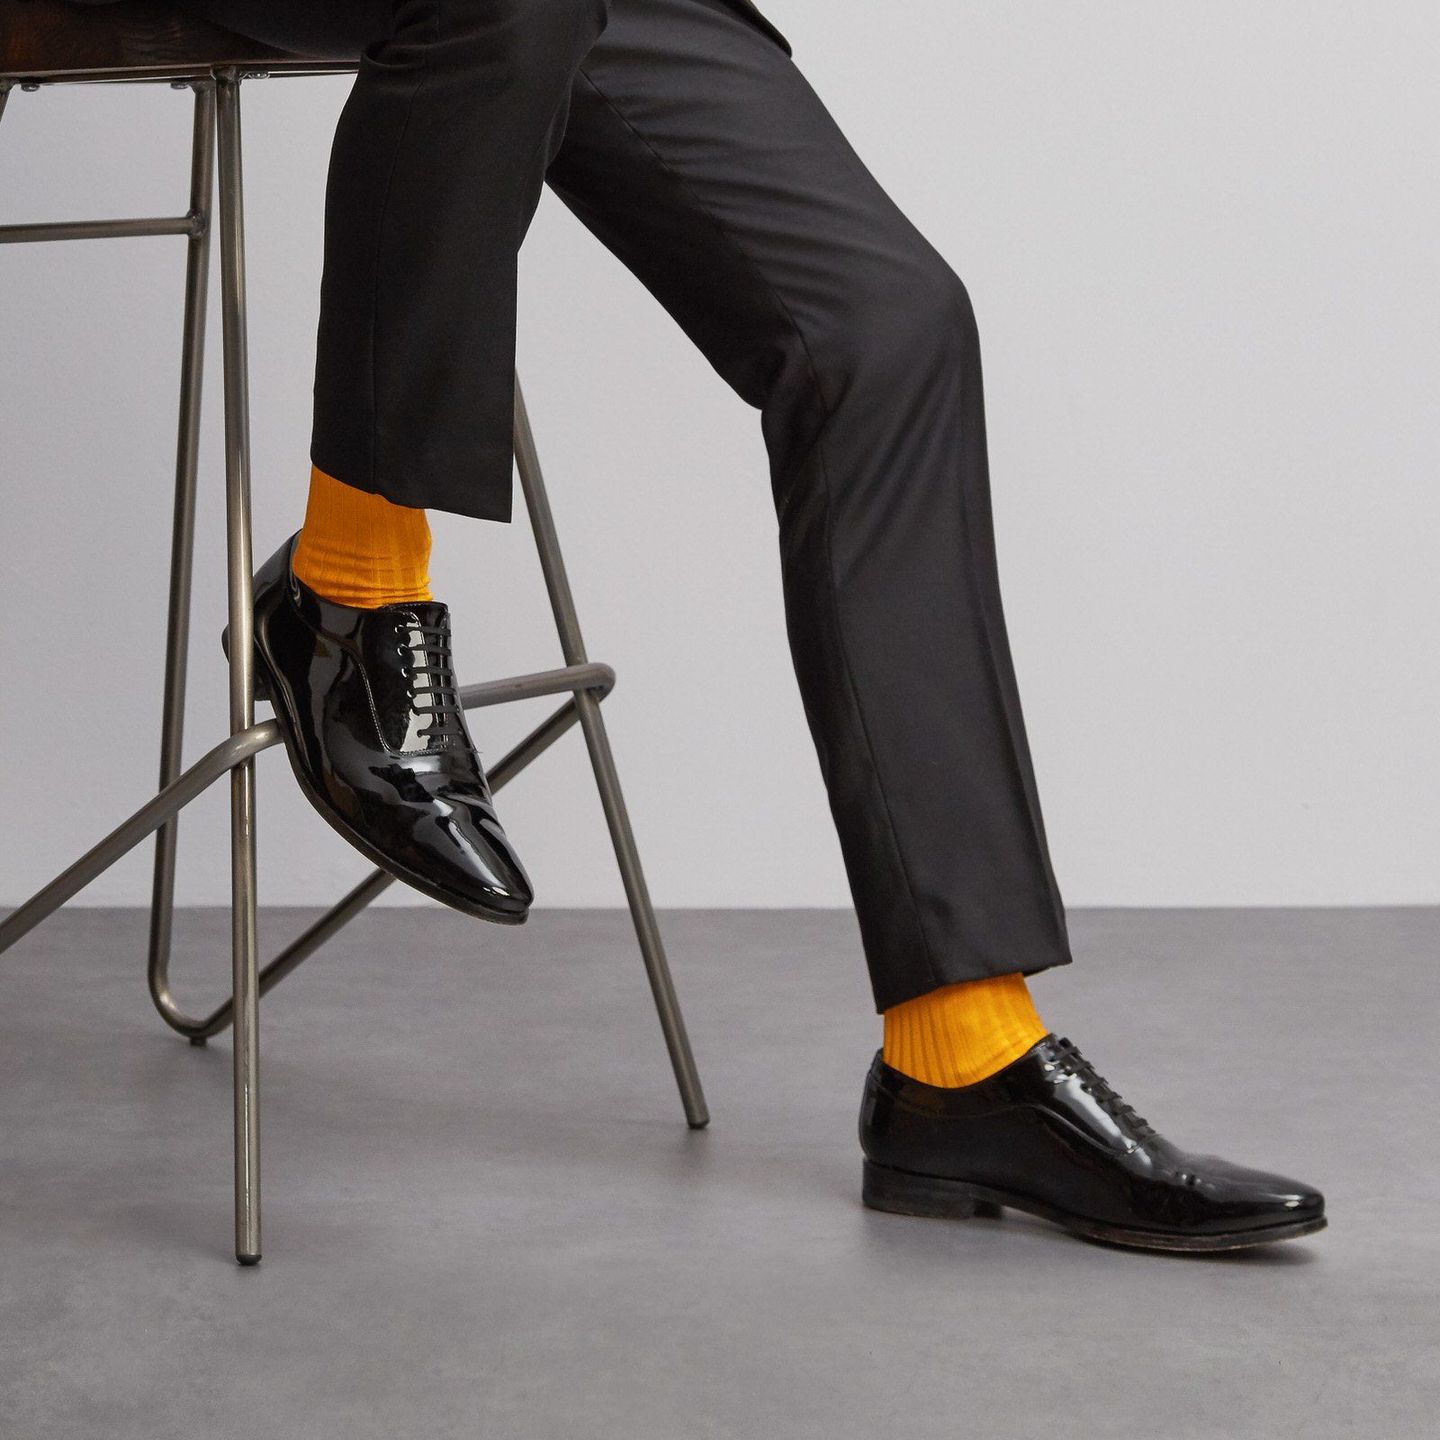 Close up of a sitting man in saffron socks, black shoes and trousers